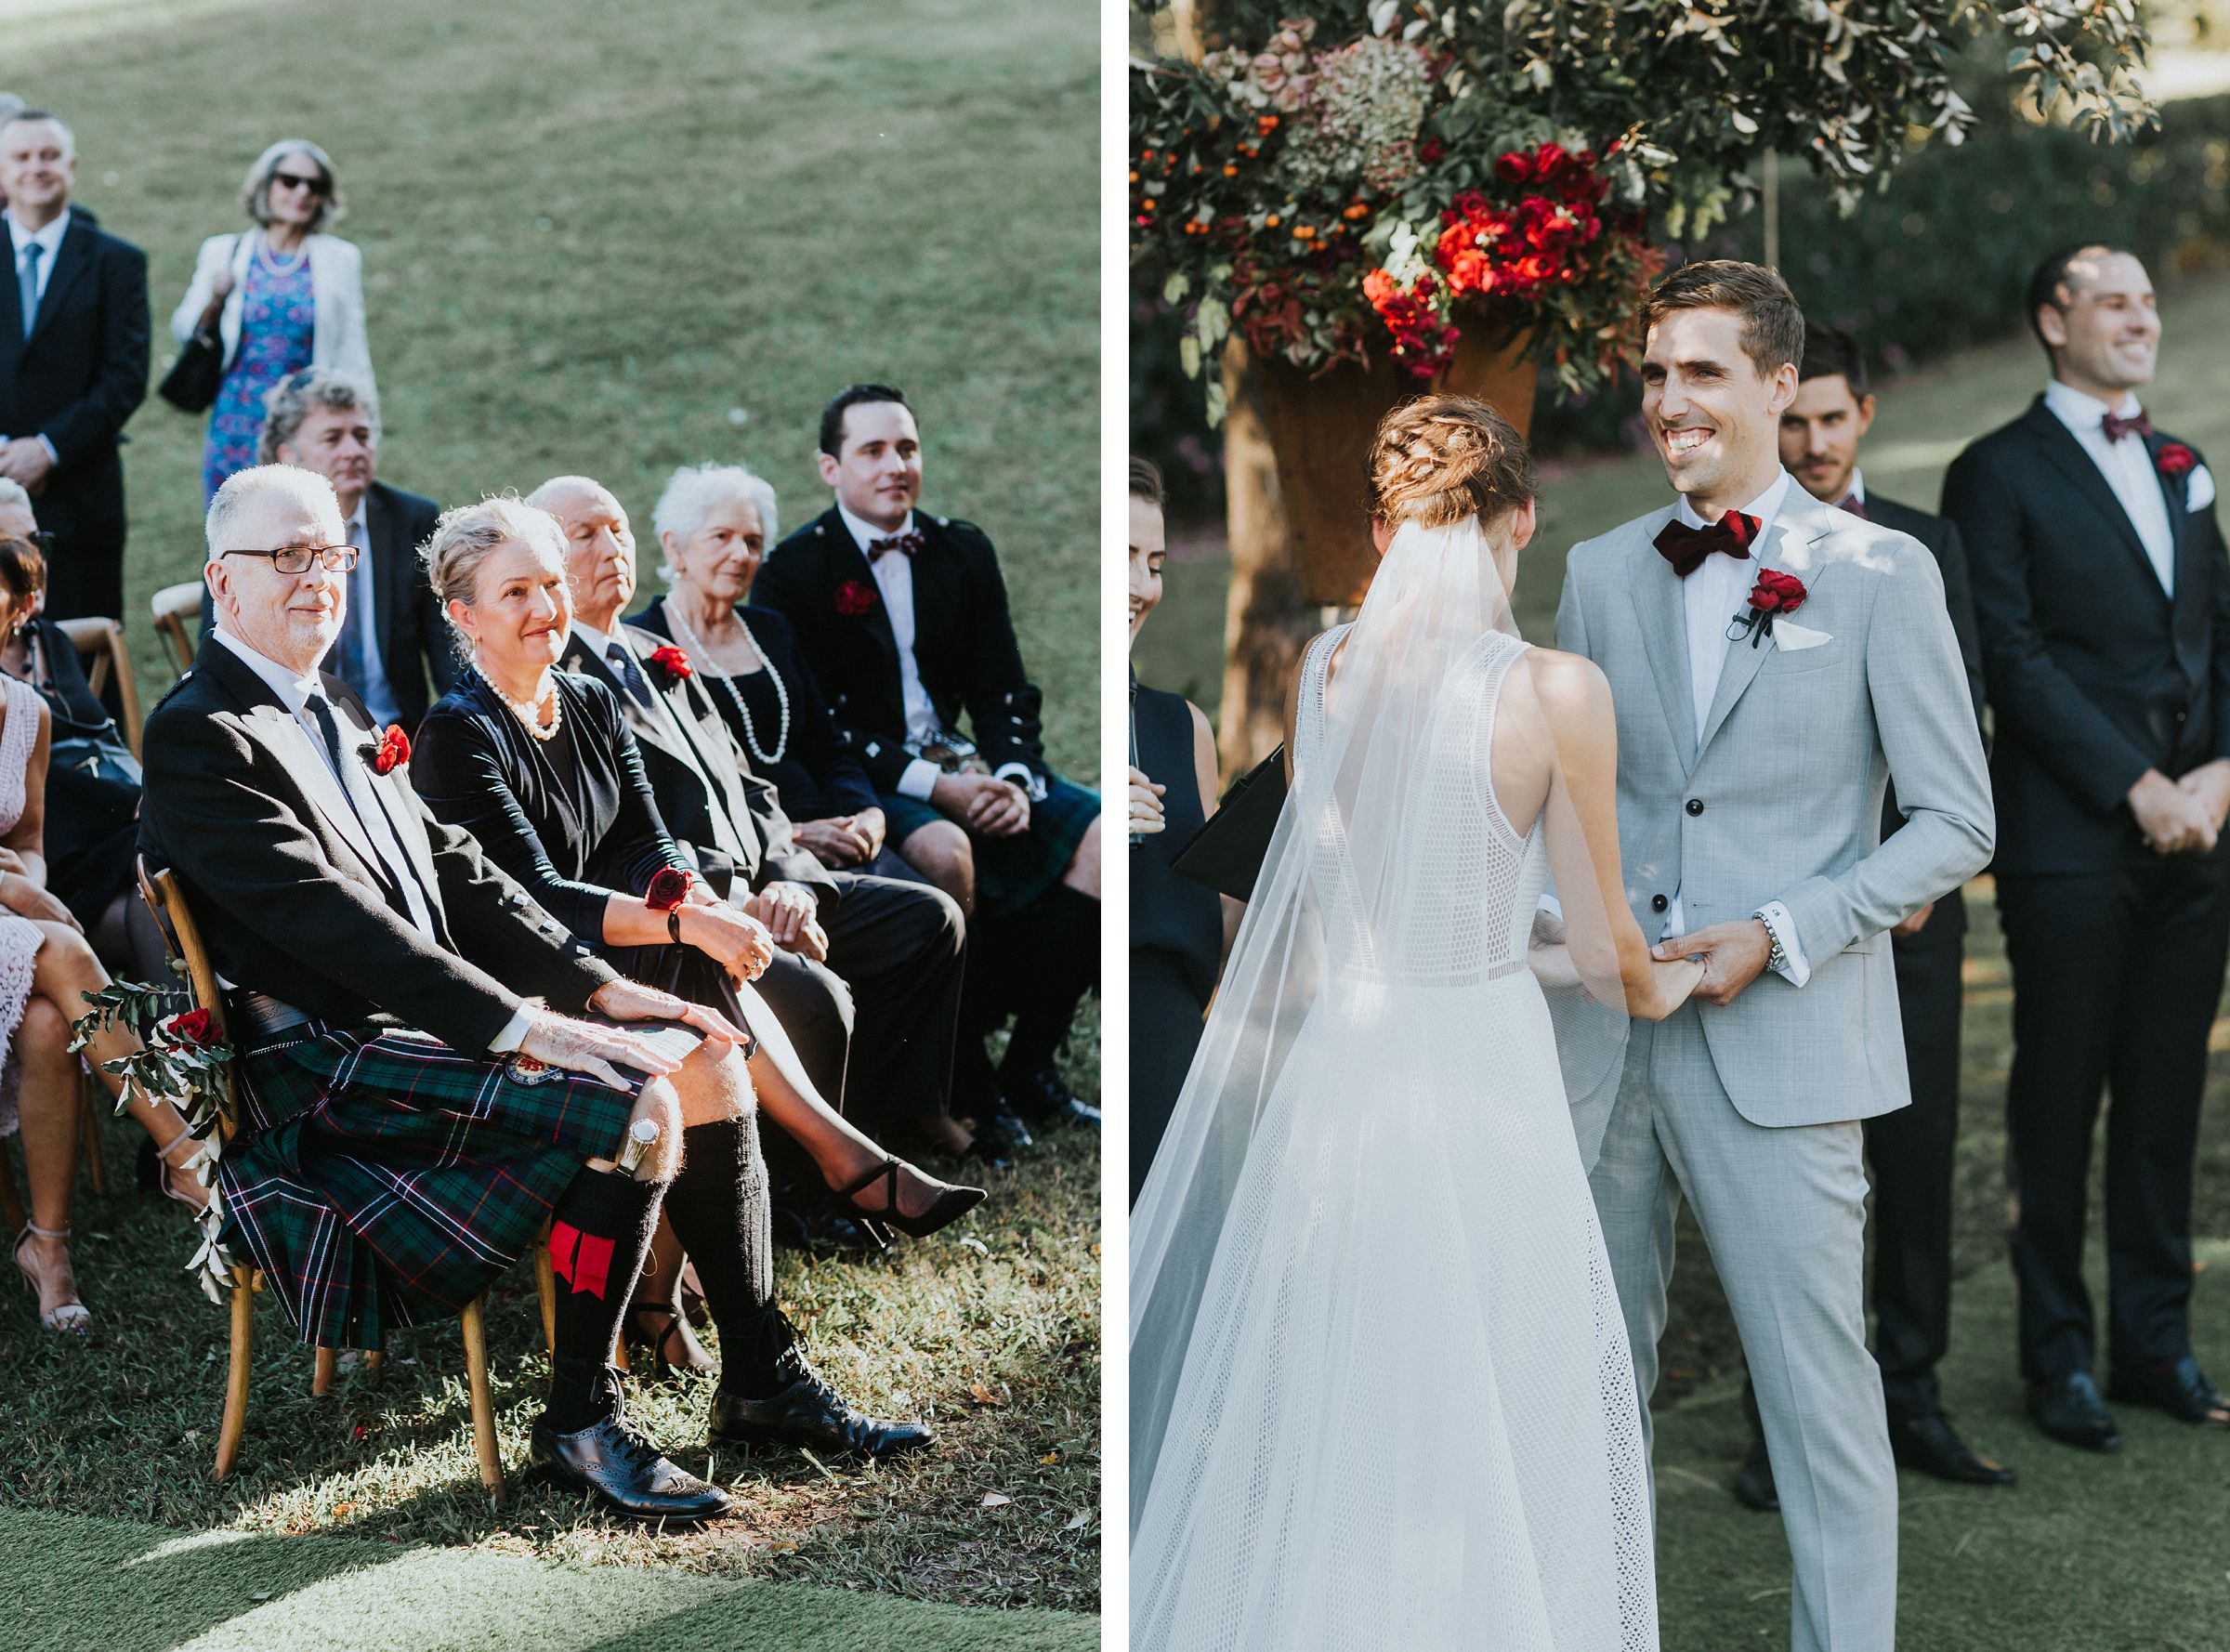 raw and genuine wedding photos of parents proudly watching the ceremony in berry